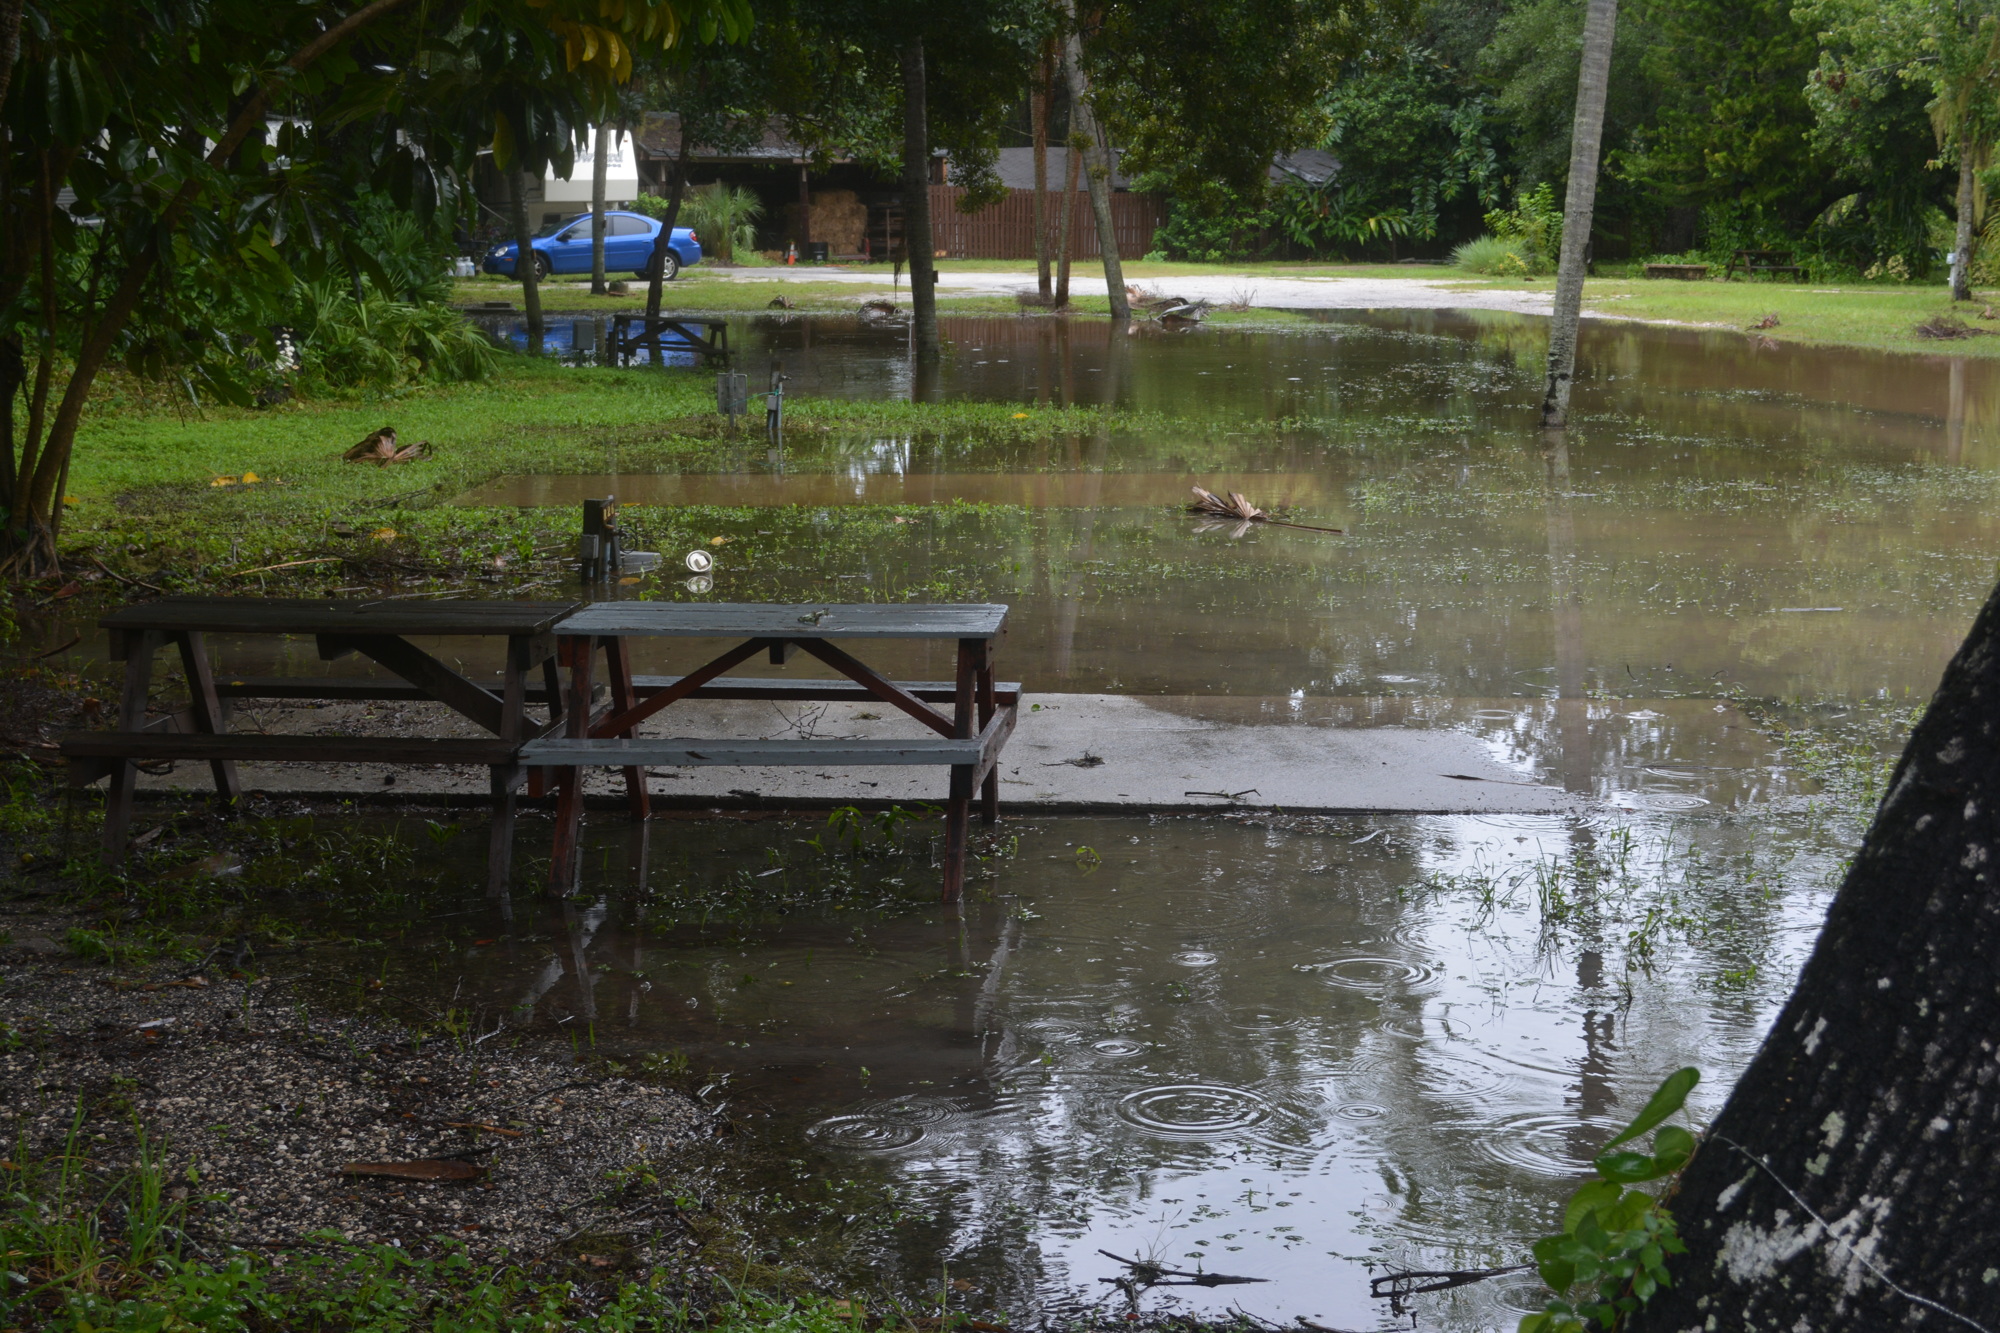 Linger Lodge General Manager David LaRusso said about 12 people had to evacuated out of RV sites on the lower level of the property due to the swelling of the Braden River. The lodge wasn't affected and was closed for renovations, anyway.